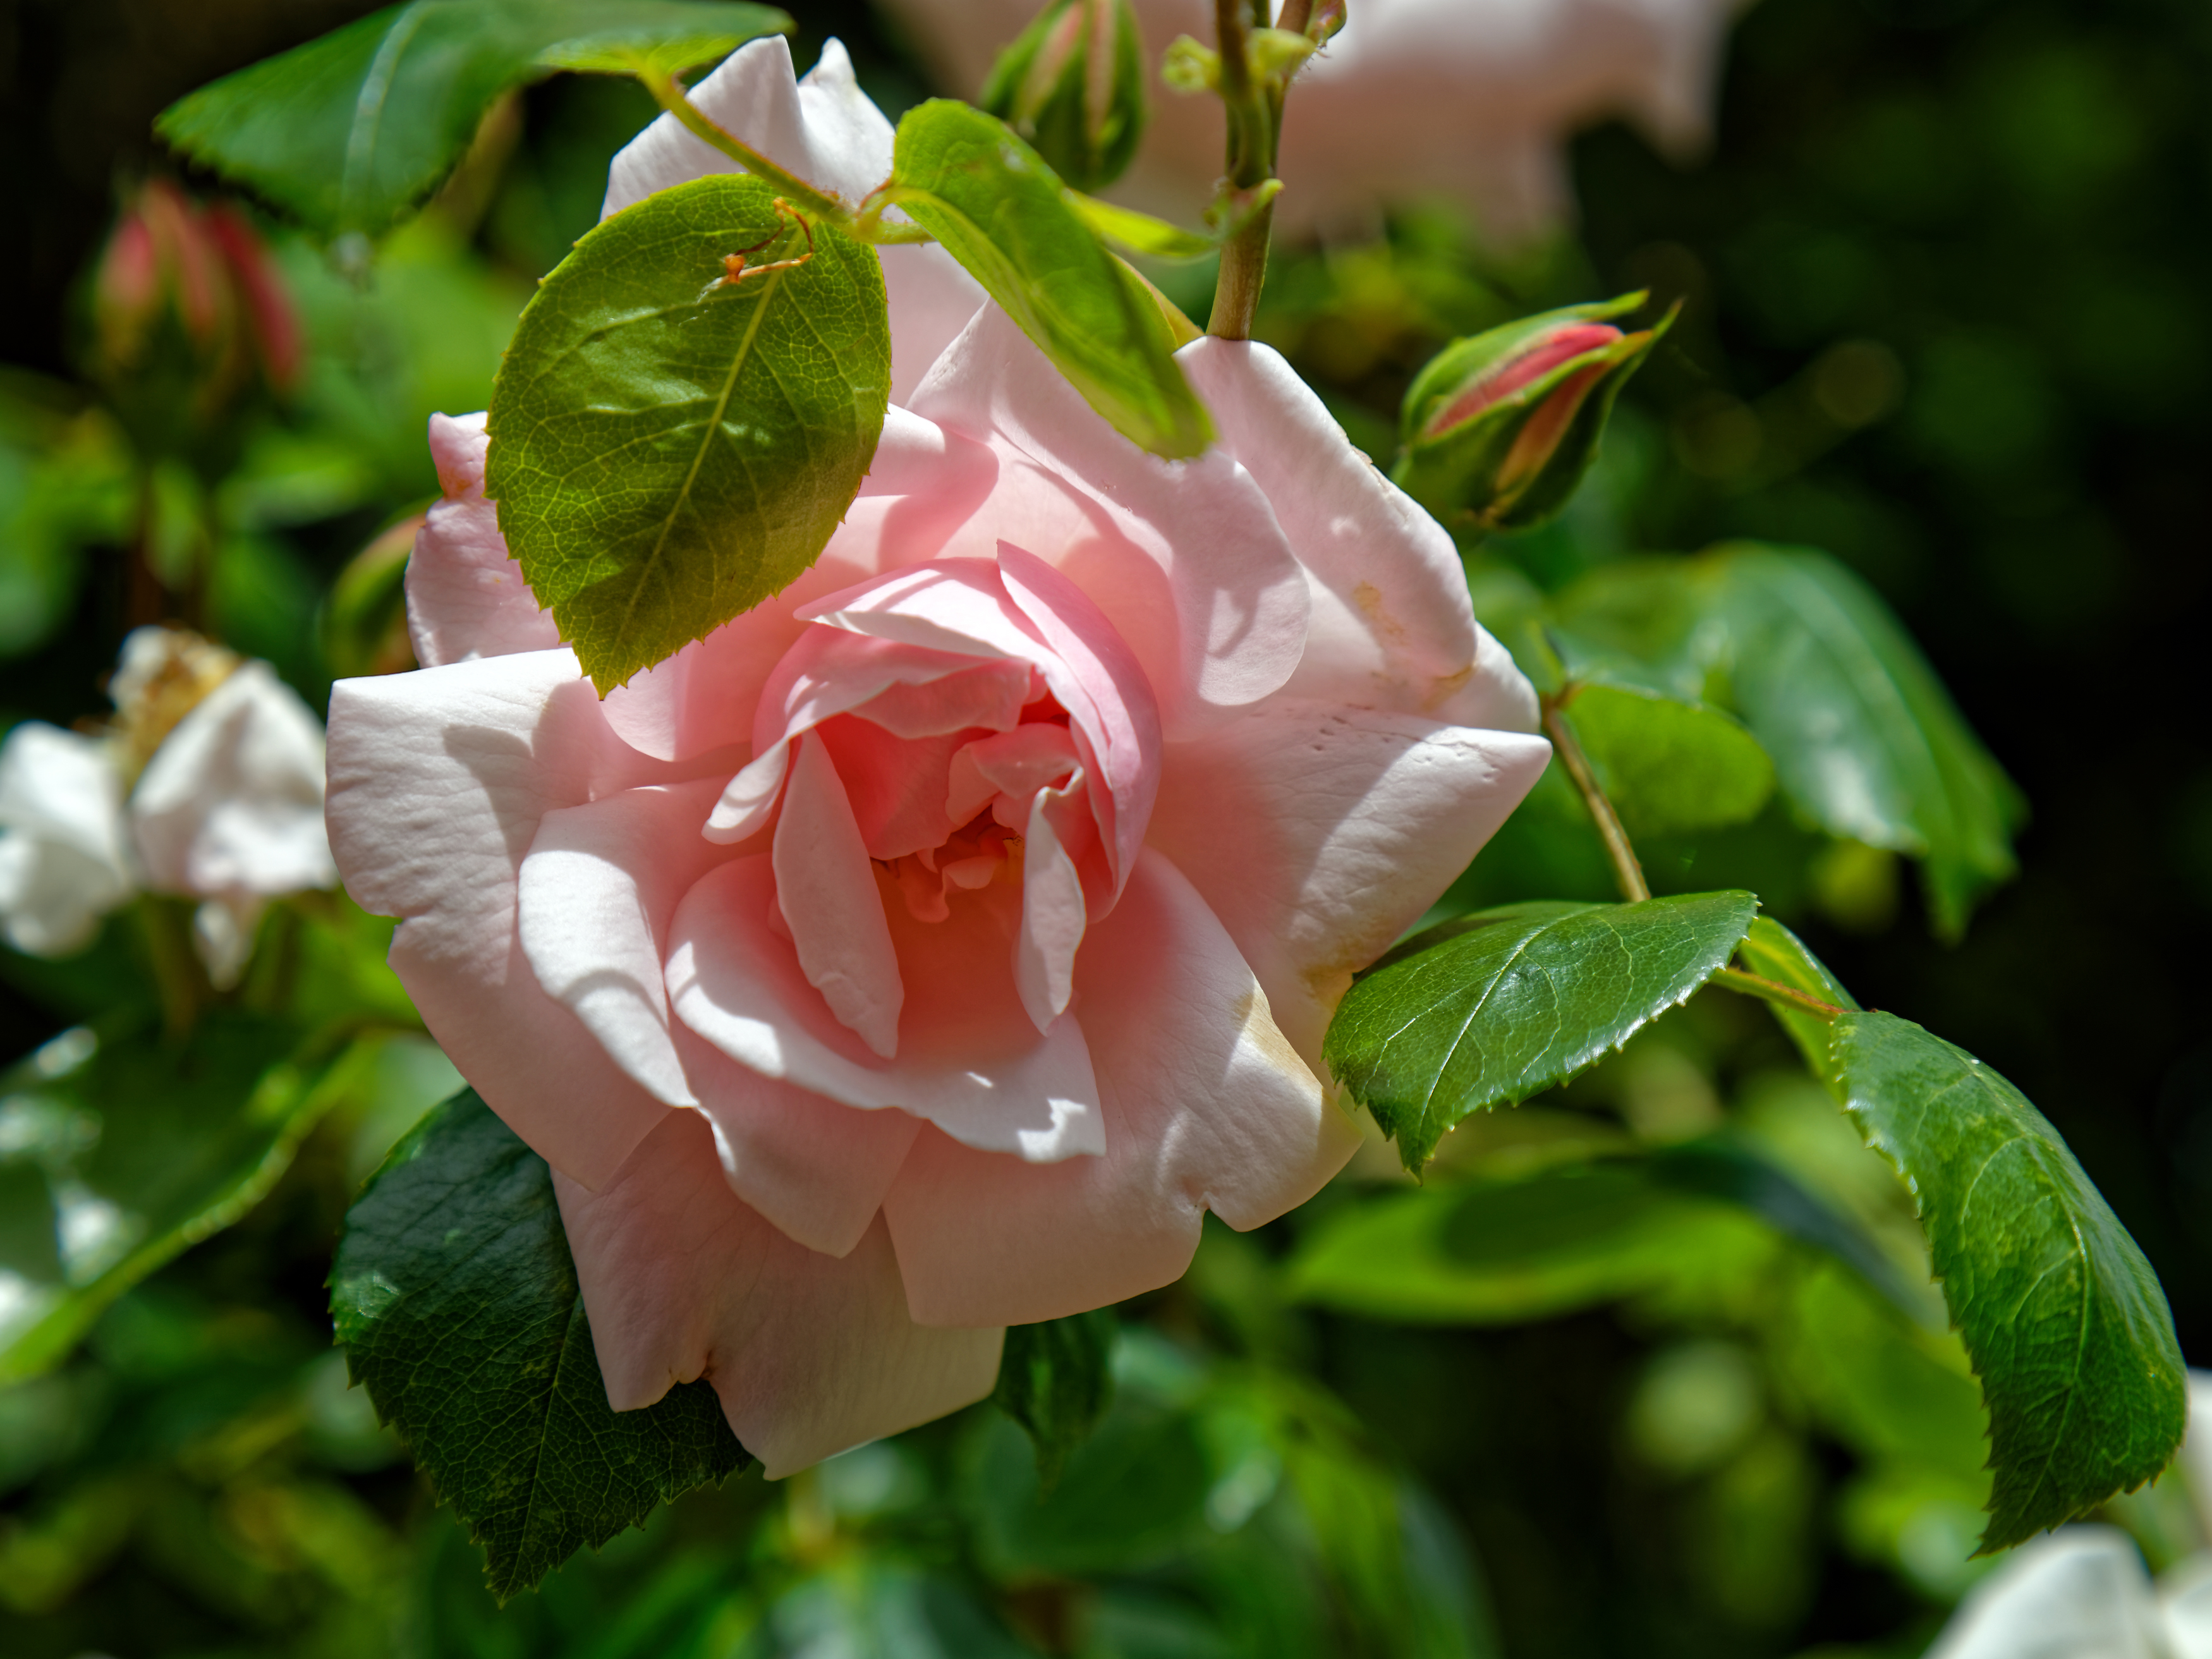 Pink rose bloom of a climbing rose at Boreham, Essex, England 2